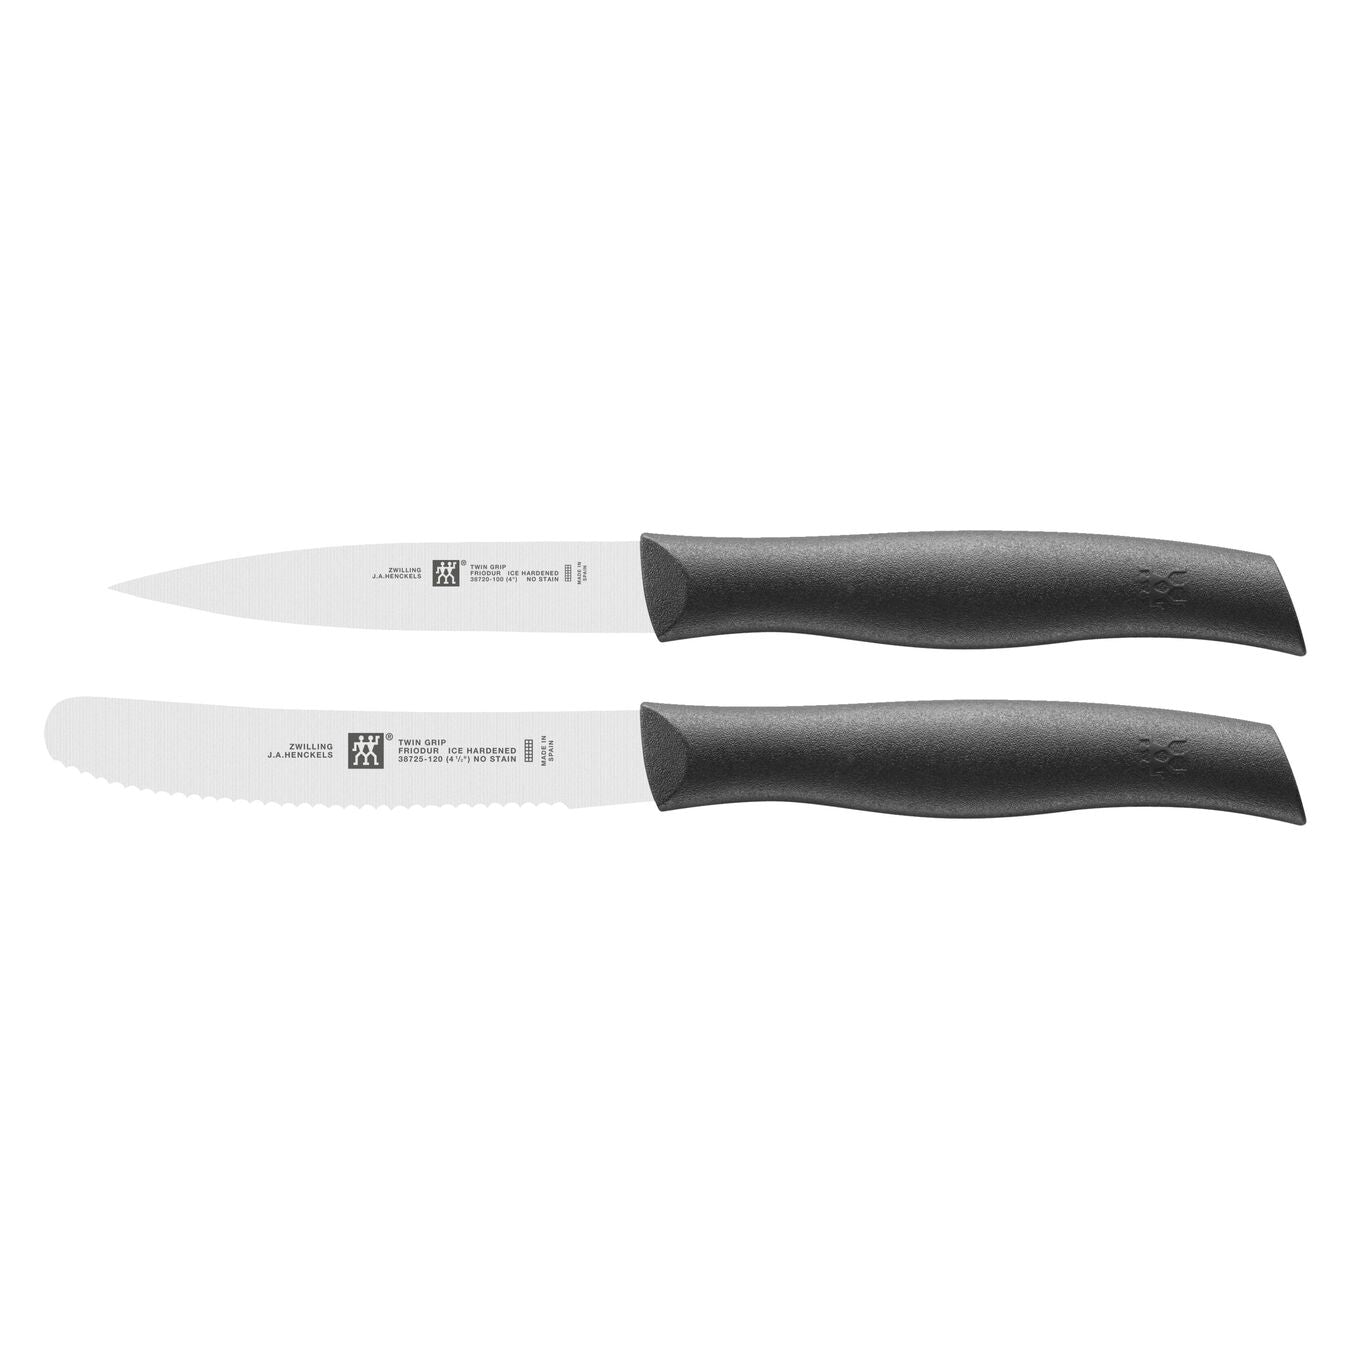 ZWILLING - Twin Grip Pairing & Utility Knife Set - 2pc